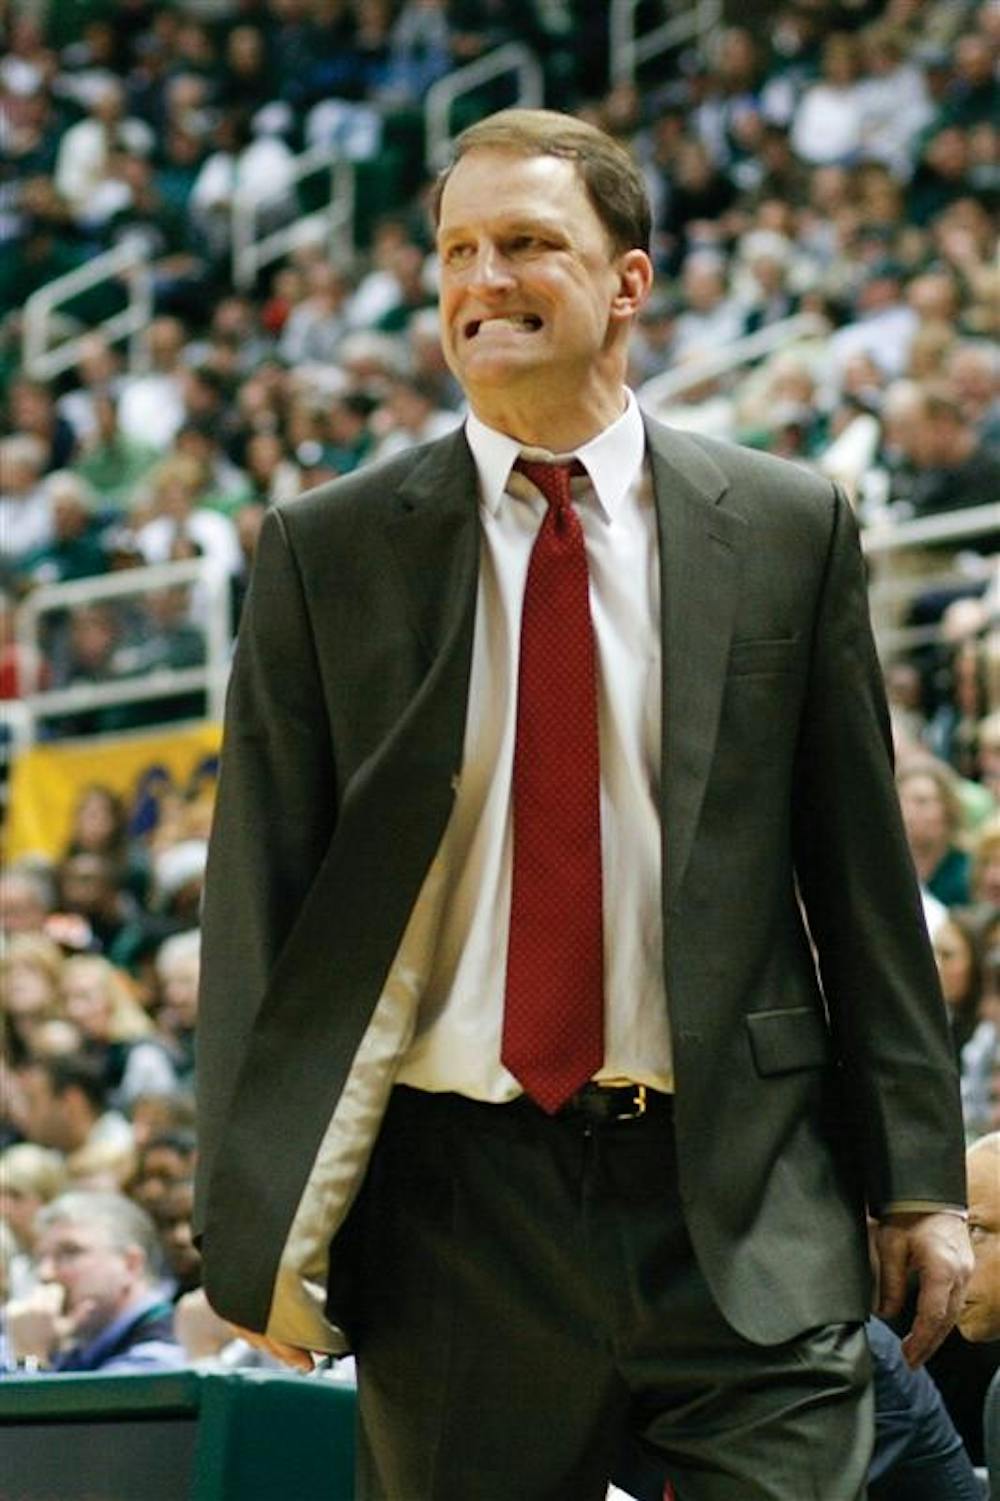 Former men's basketball interim head coach Dan Dakich shows frustration during the Hoosier's 103-74 loss to Michigan State on Sunday, March 2, 2008 in East Lansing, Mich.